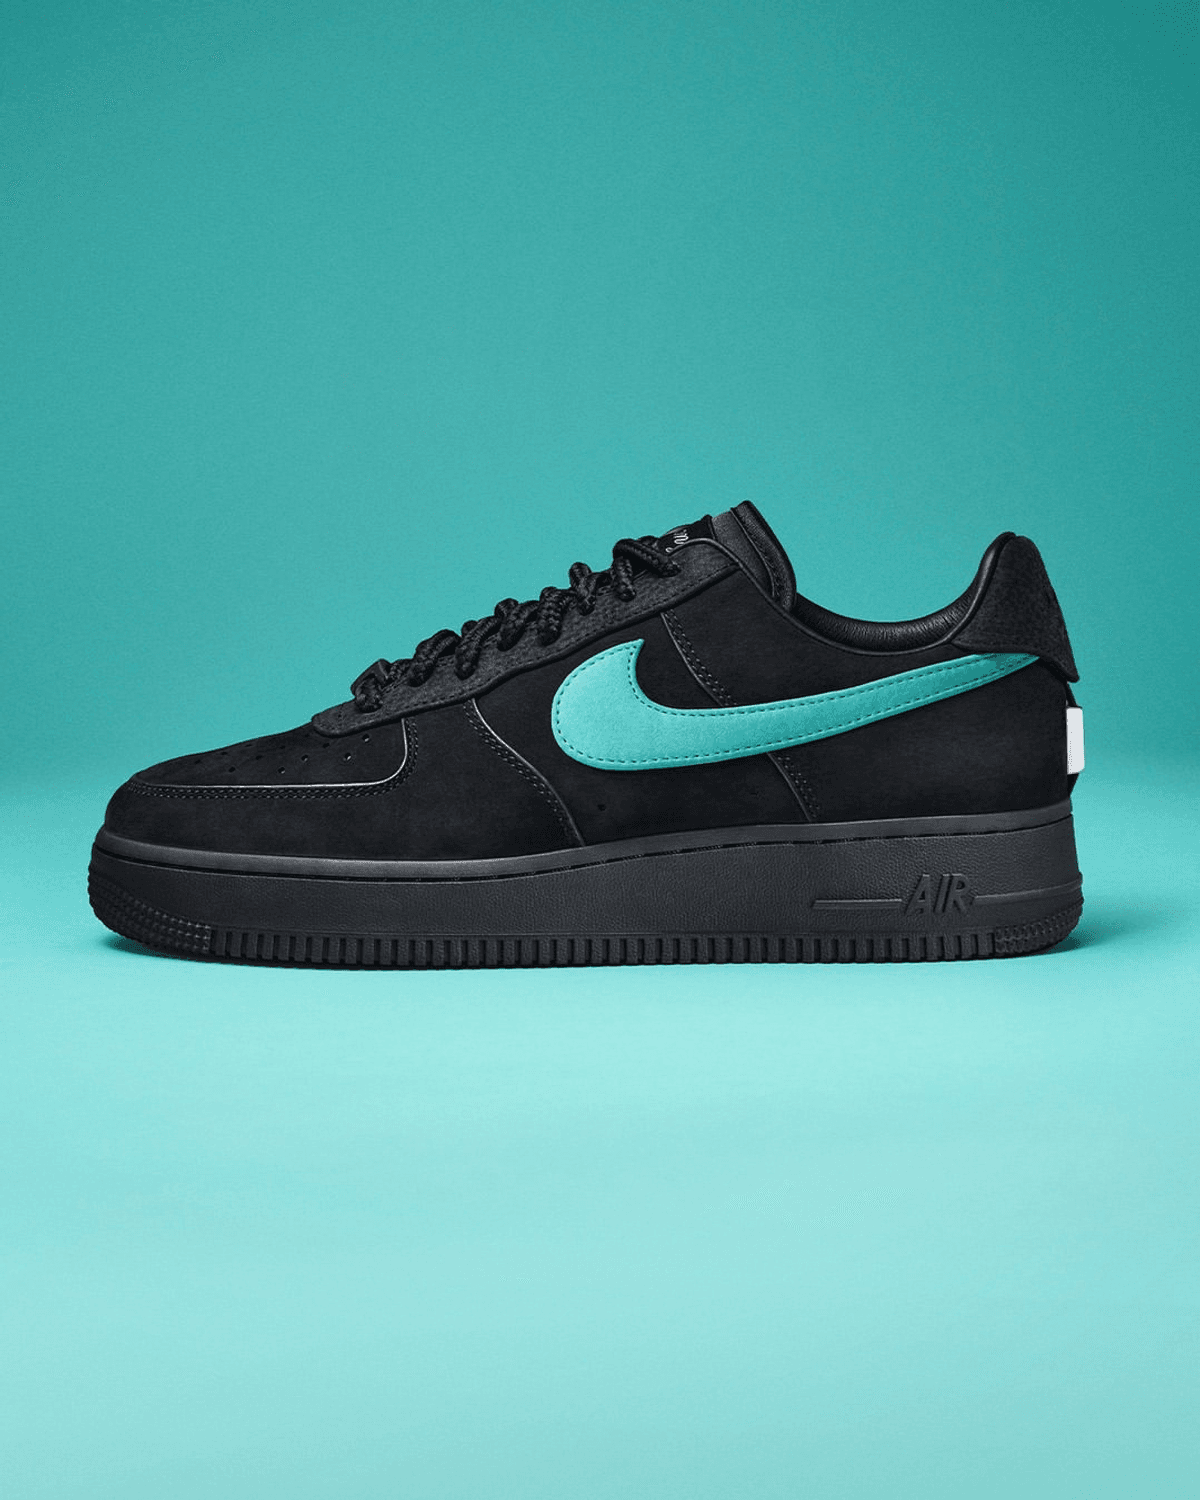 First Look At The Tiffany & CO. Nike Air Force 1